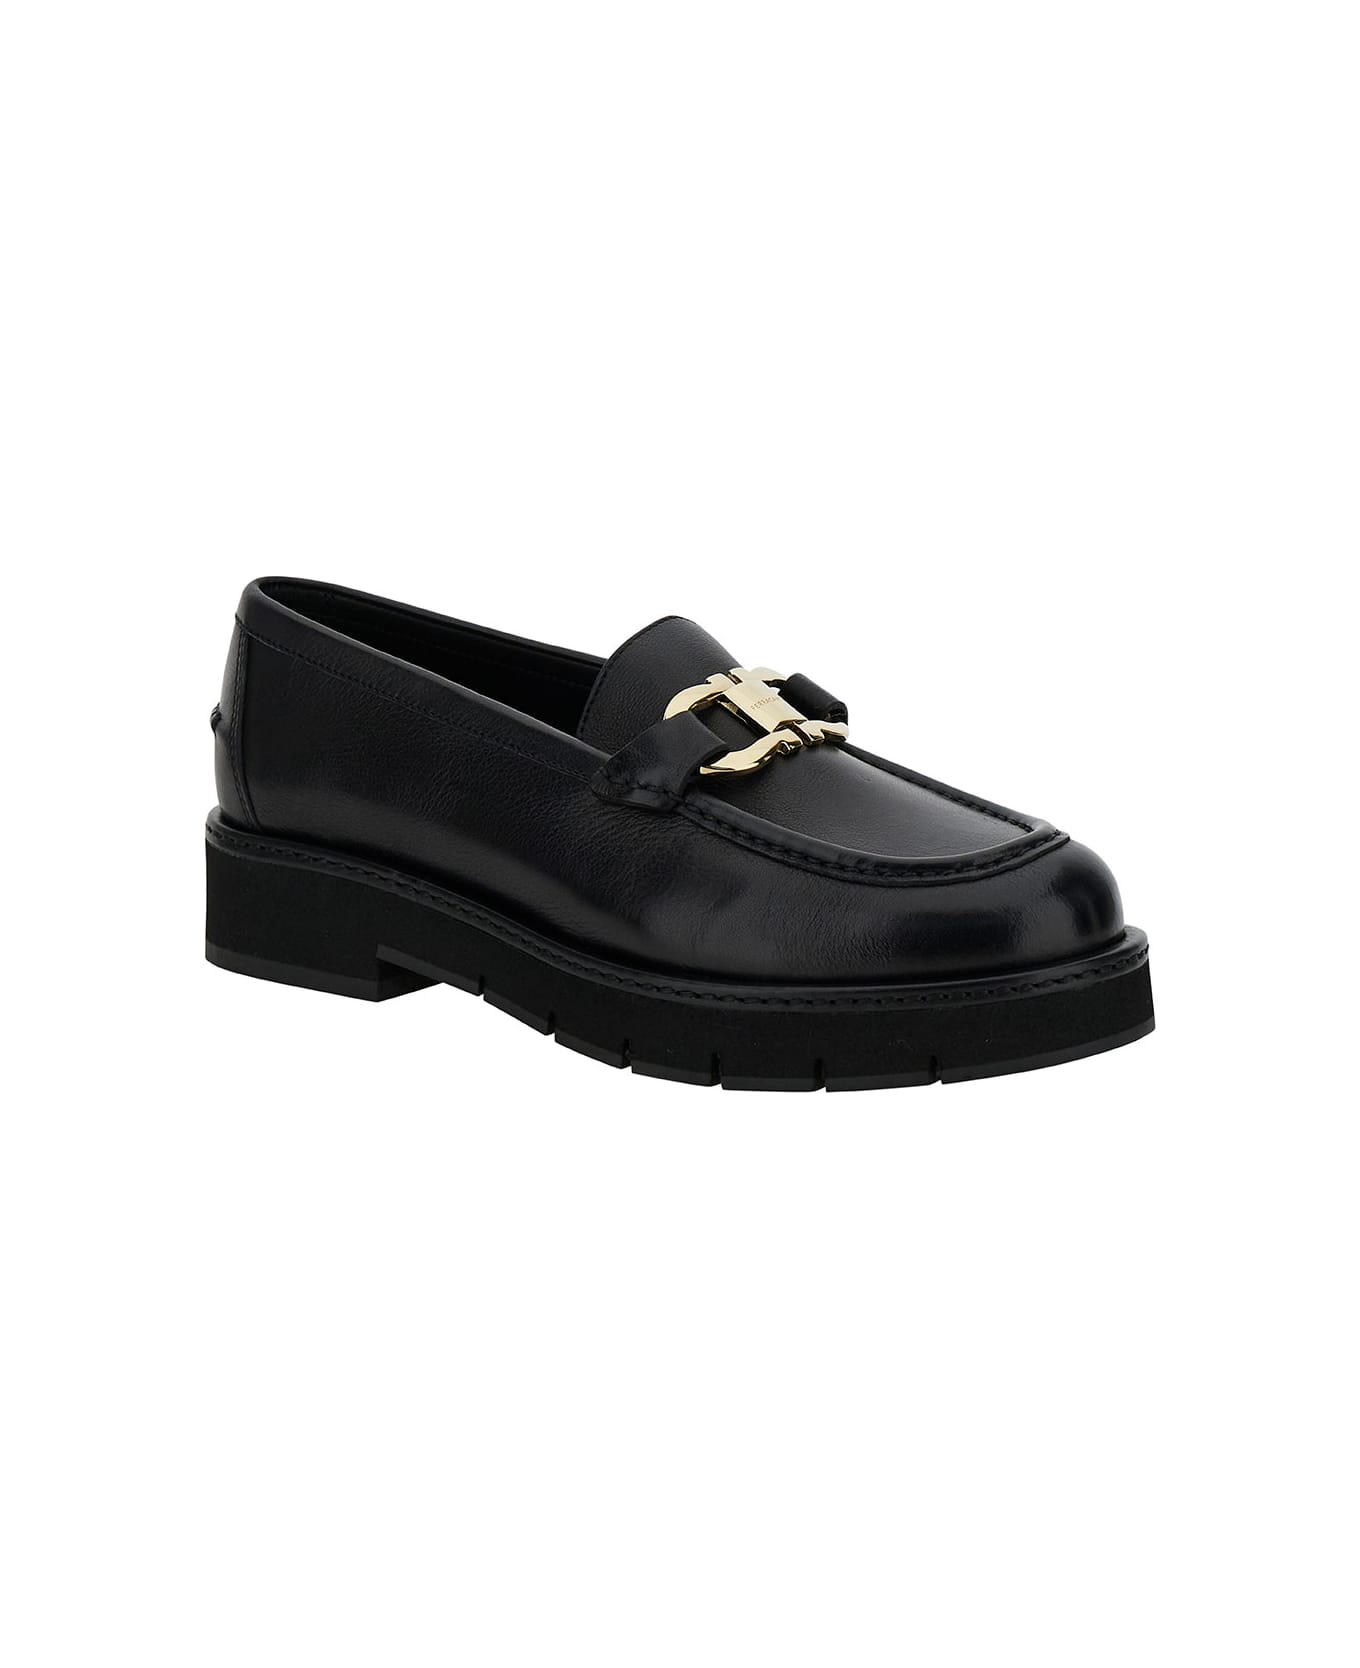 Ferragamo 'mayna' Black Loafers With Gancini Detail And Platform In Leather Woman - Black